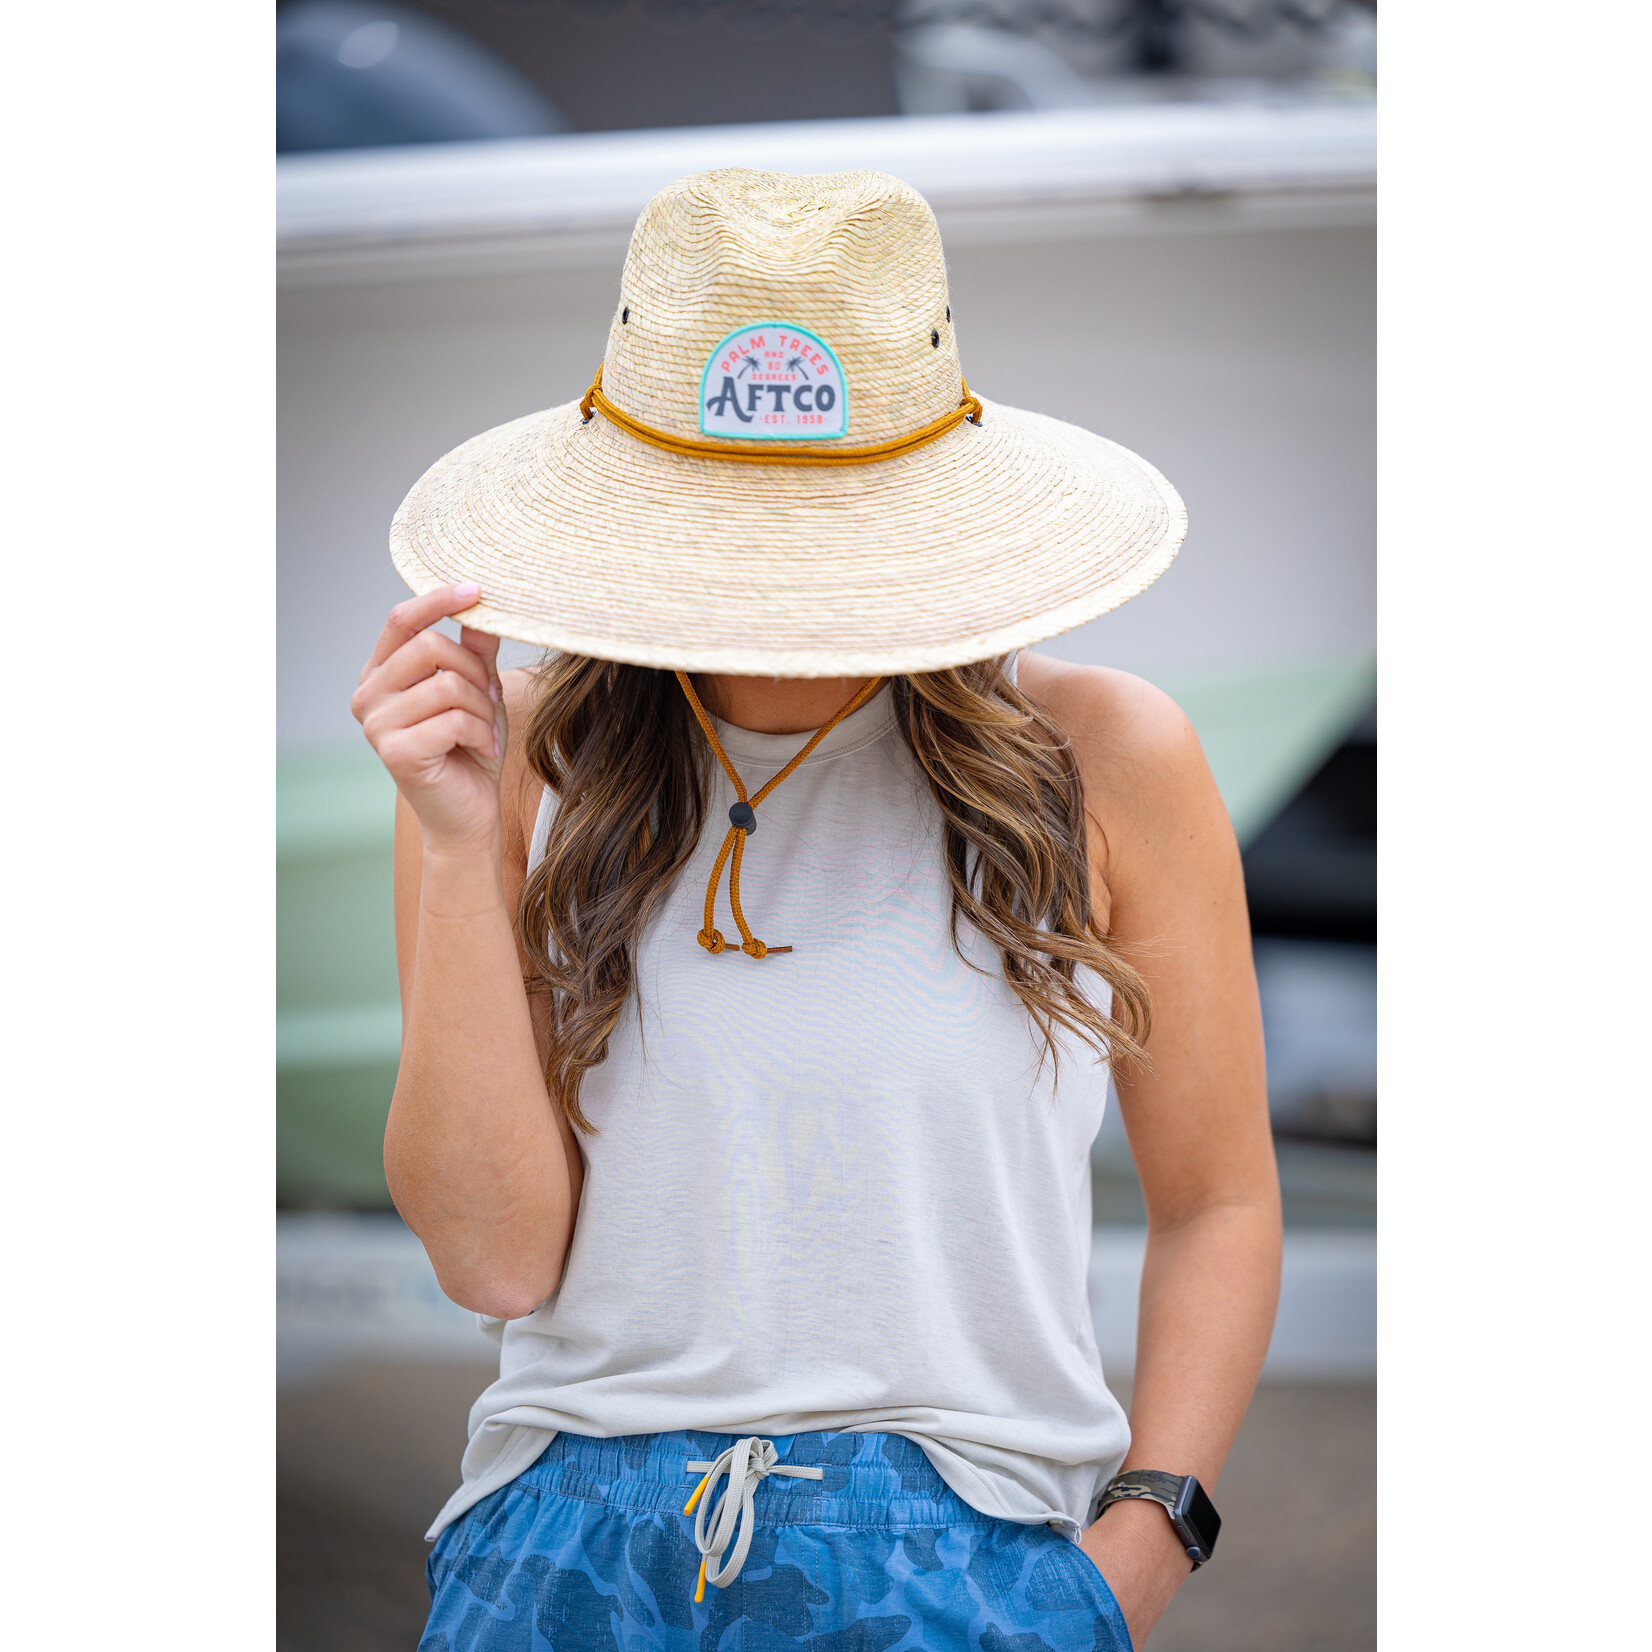 Aftco Aftco Playa Packable Straw Hat